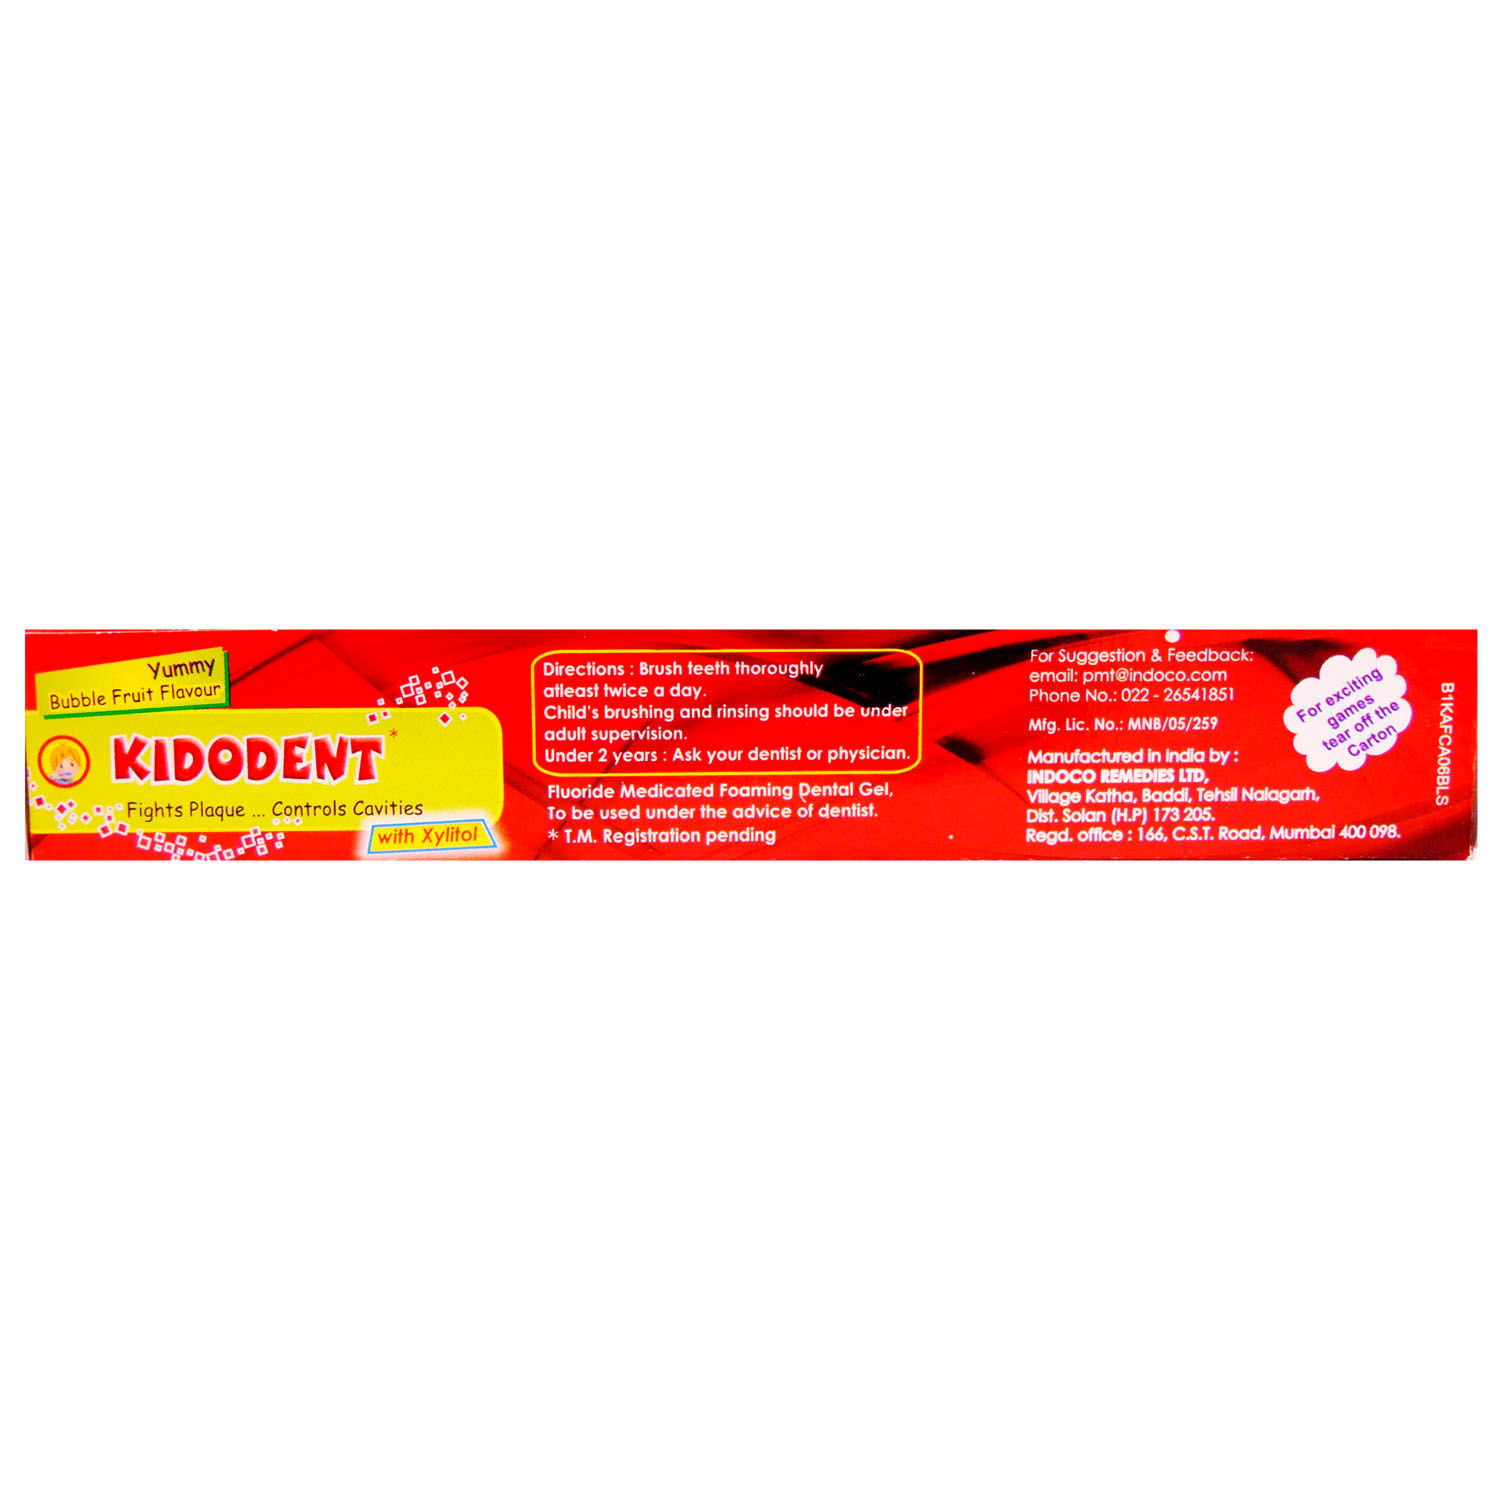 Kidodent Bubble Fruit Flavoured Kids Toothpaste, 75 gm, Pack of 1 